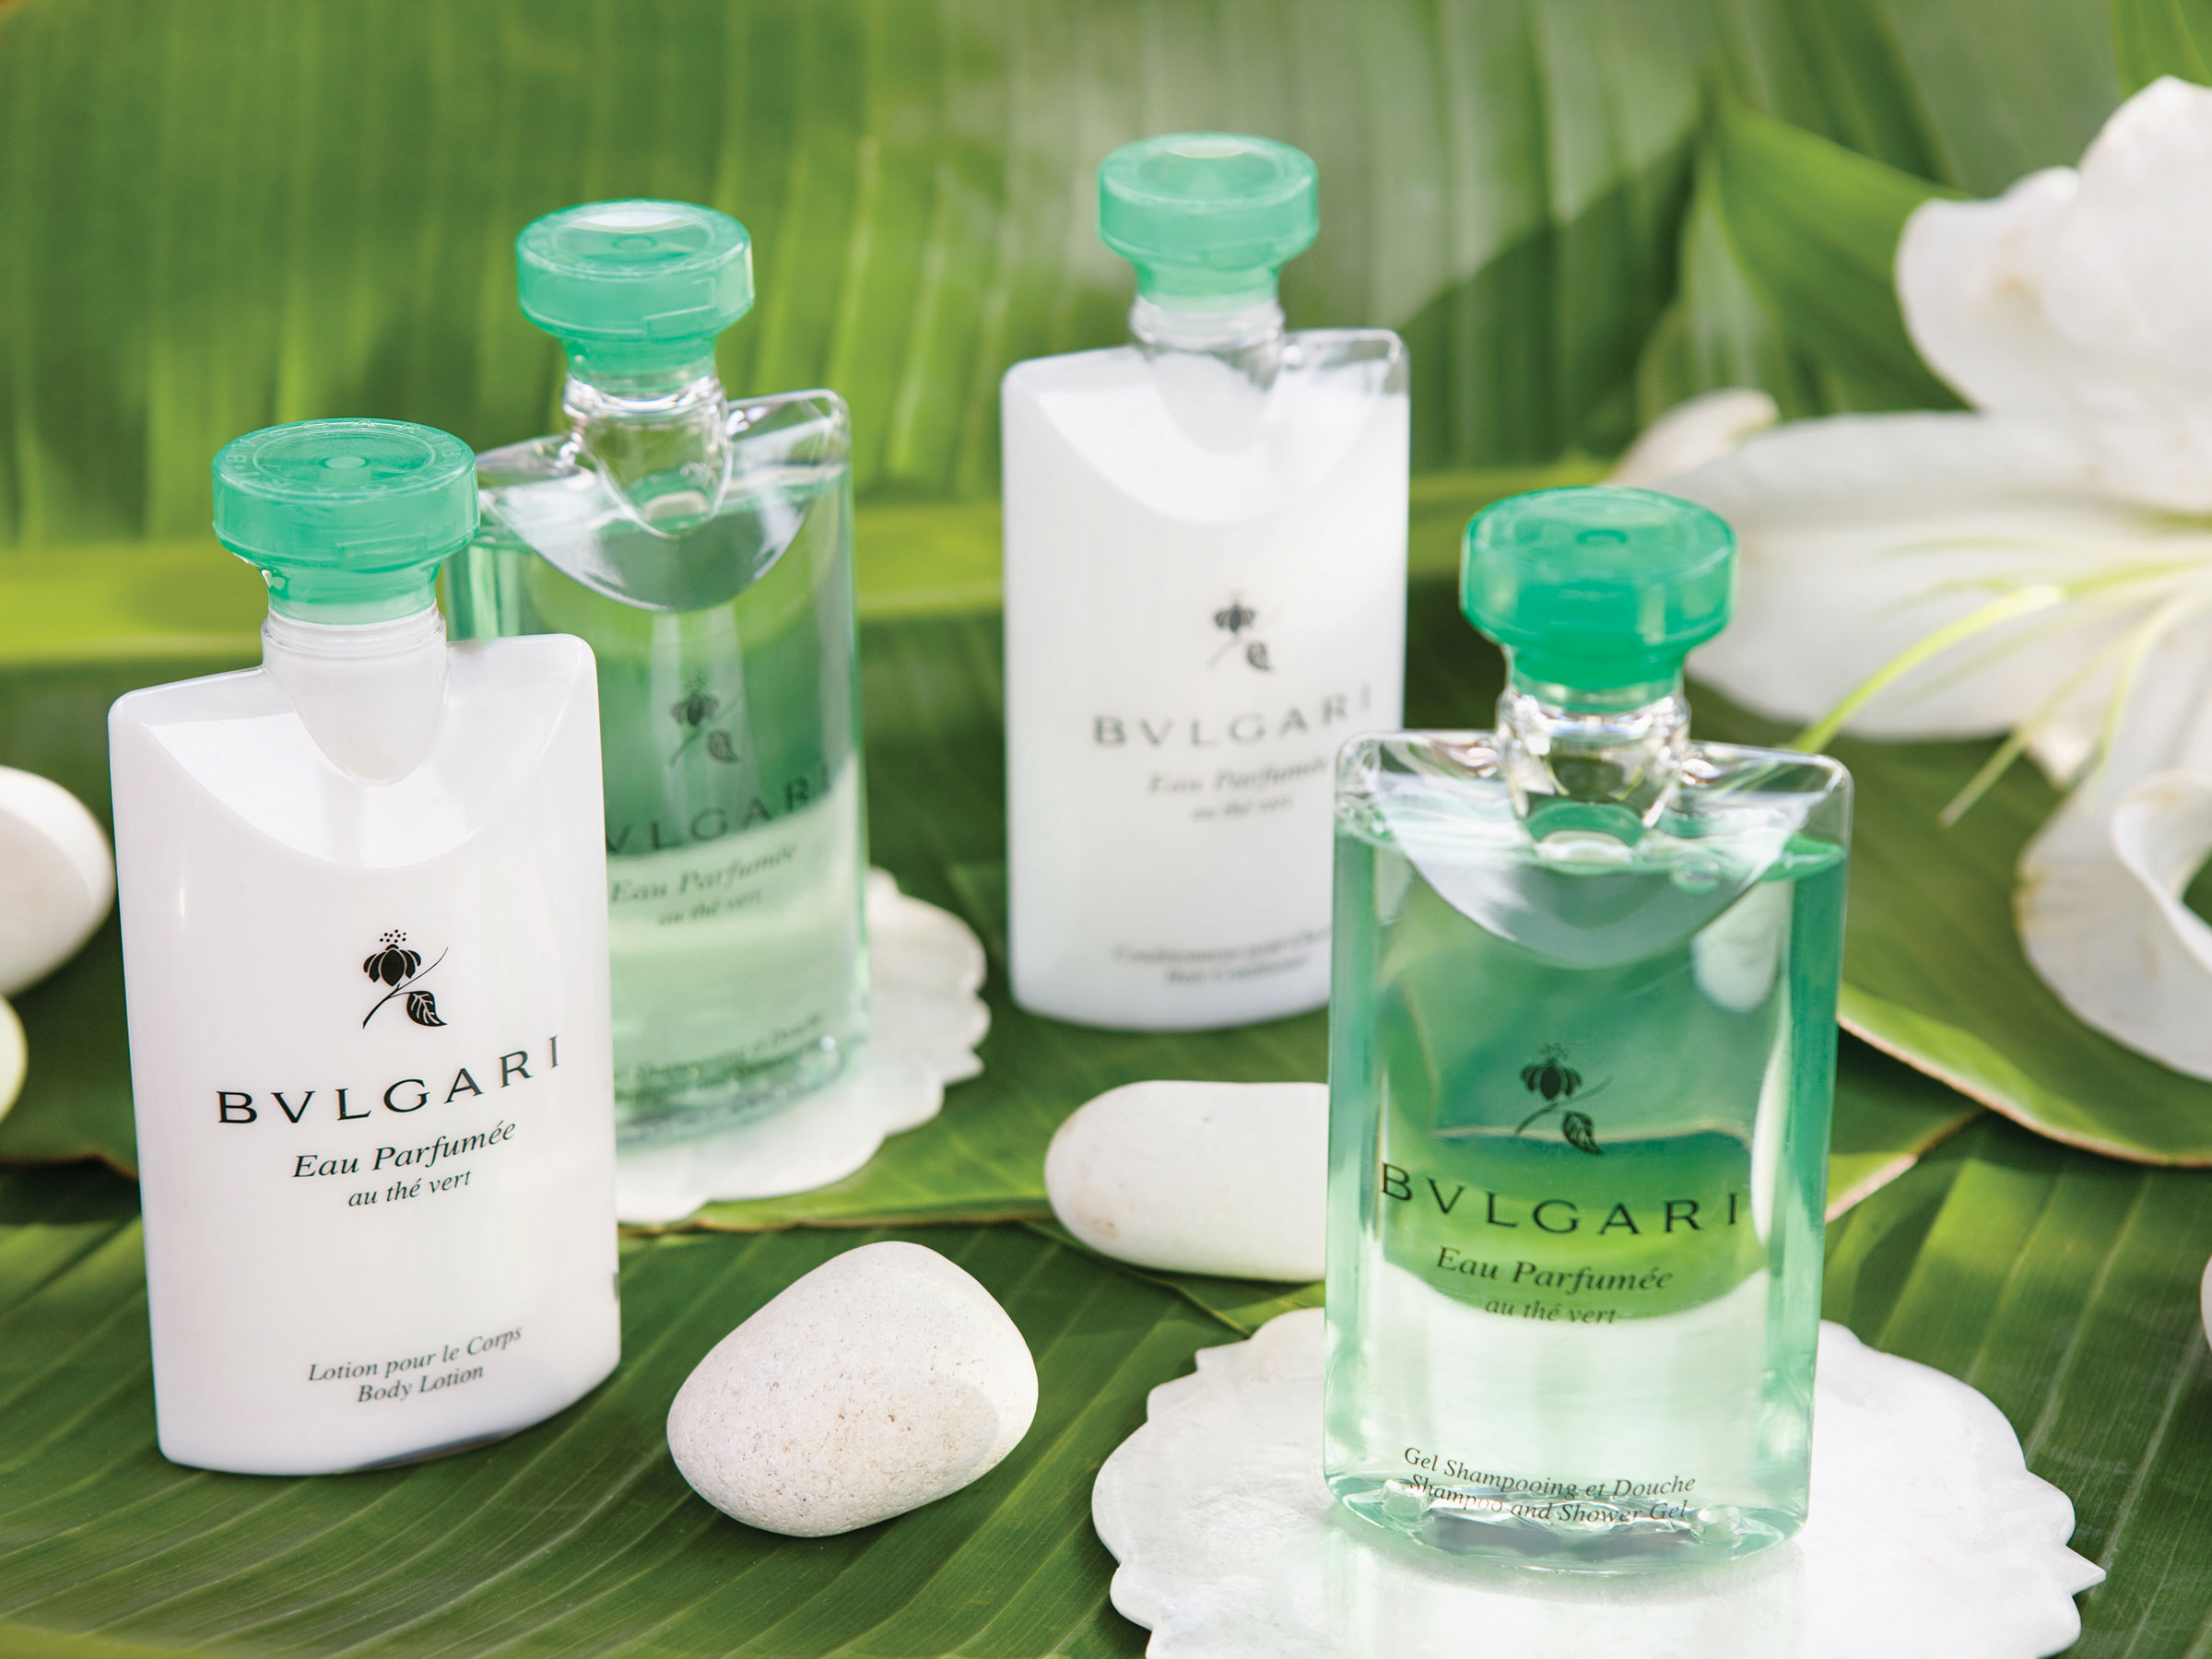 Bvlgari shampoo is included in the Excellence Club Beachfront House Suite with Plunge Pool